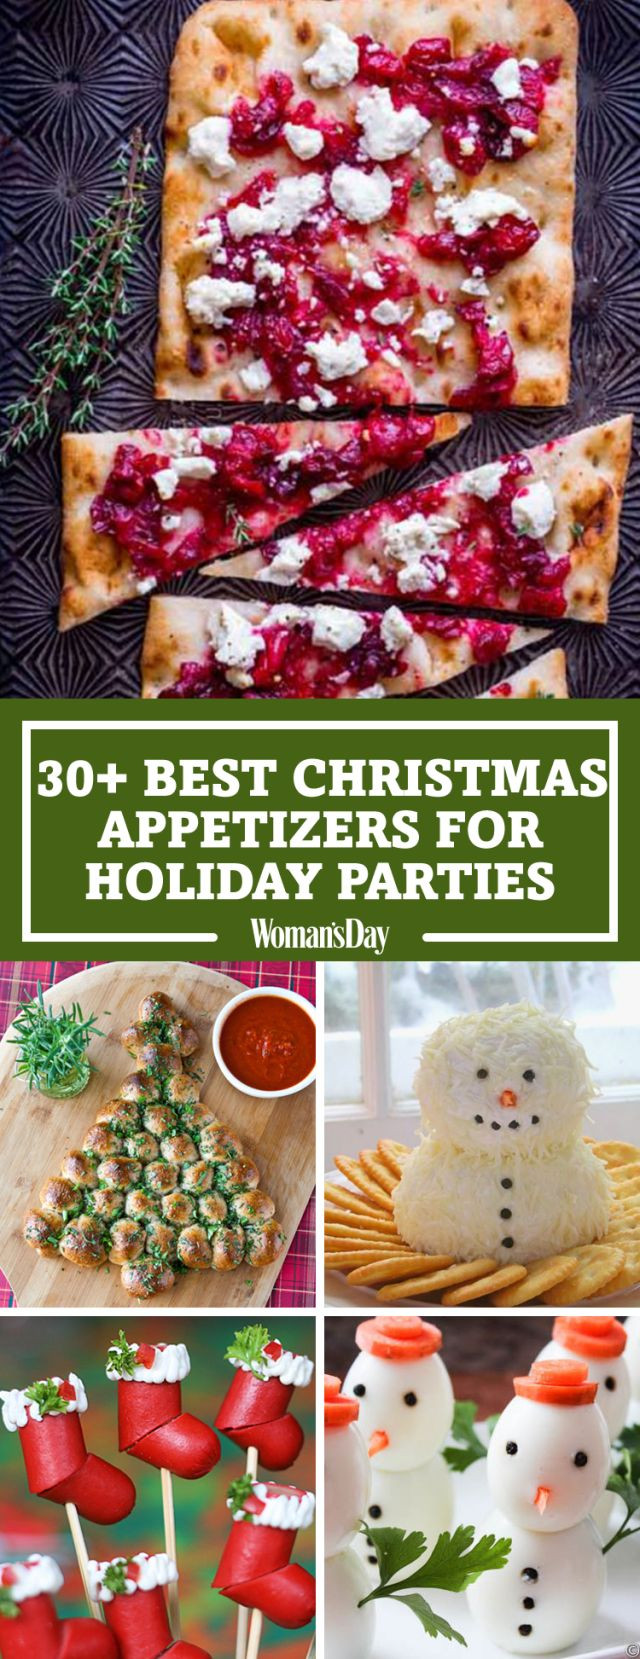 Christmas Appetizers On Pinterest
 Christmas appetizers Women day and Appetizer recipes on